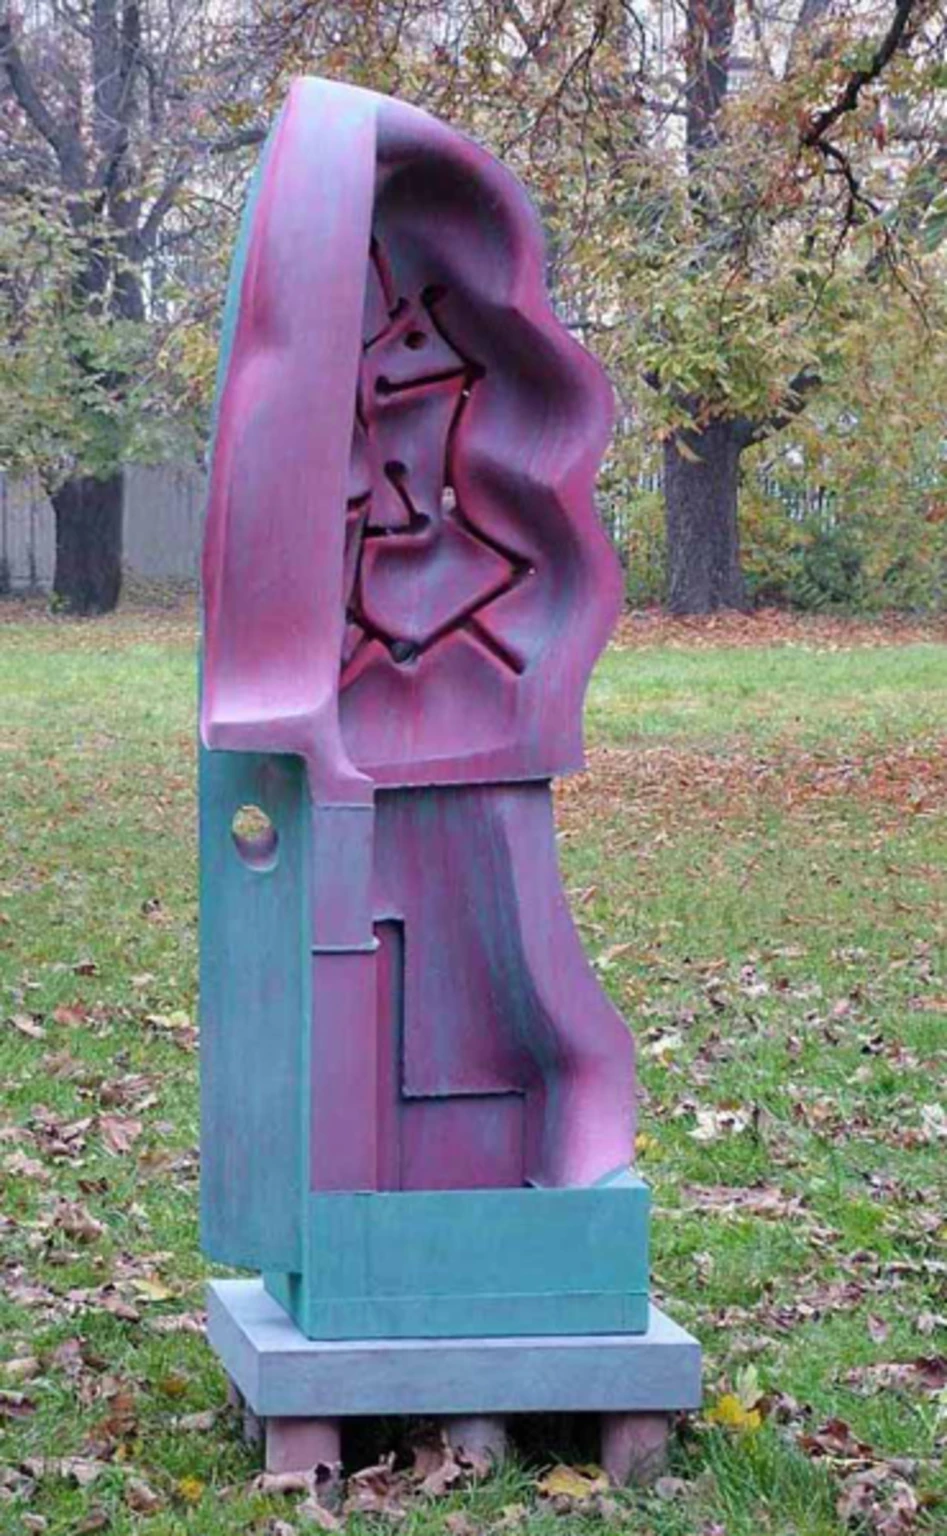 Shelter, 2005 - colored and painted concrete, 204 x 50 x 50 cm